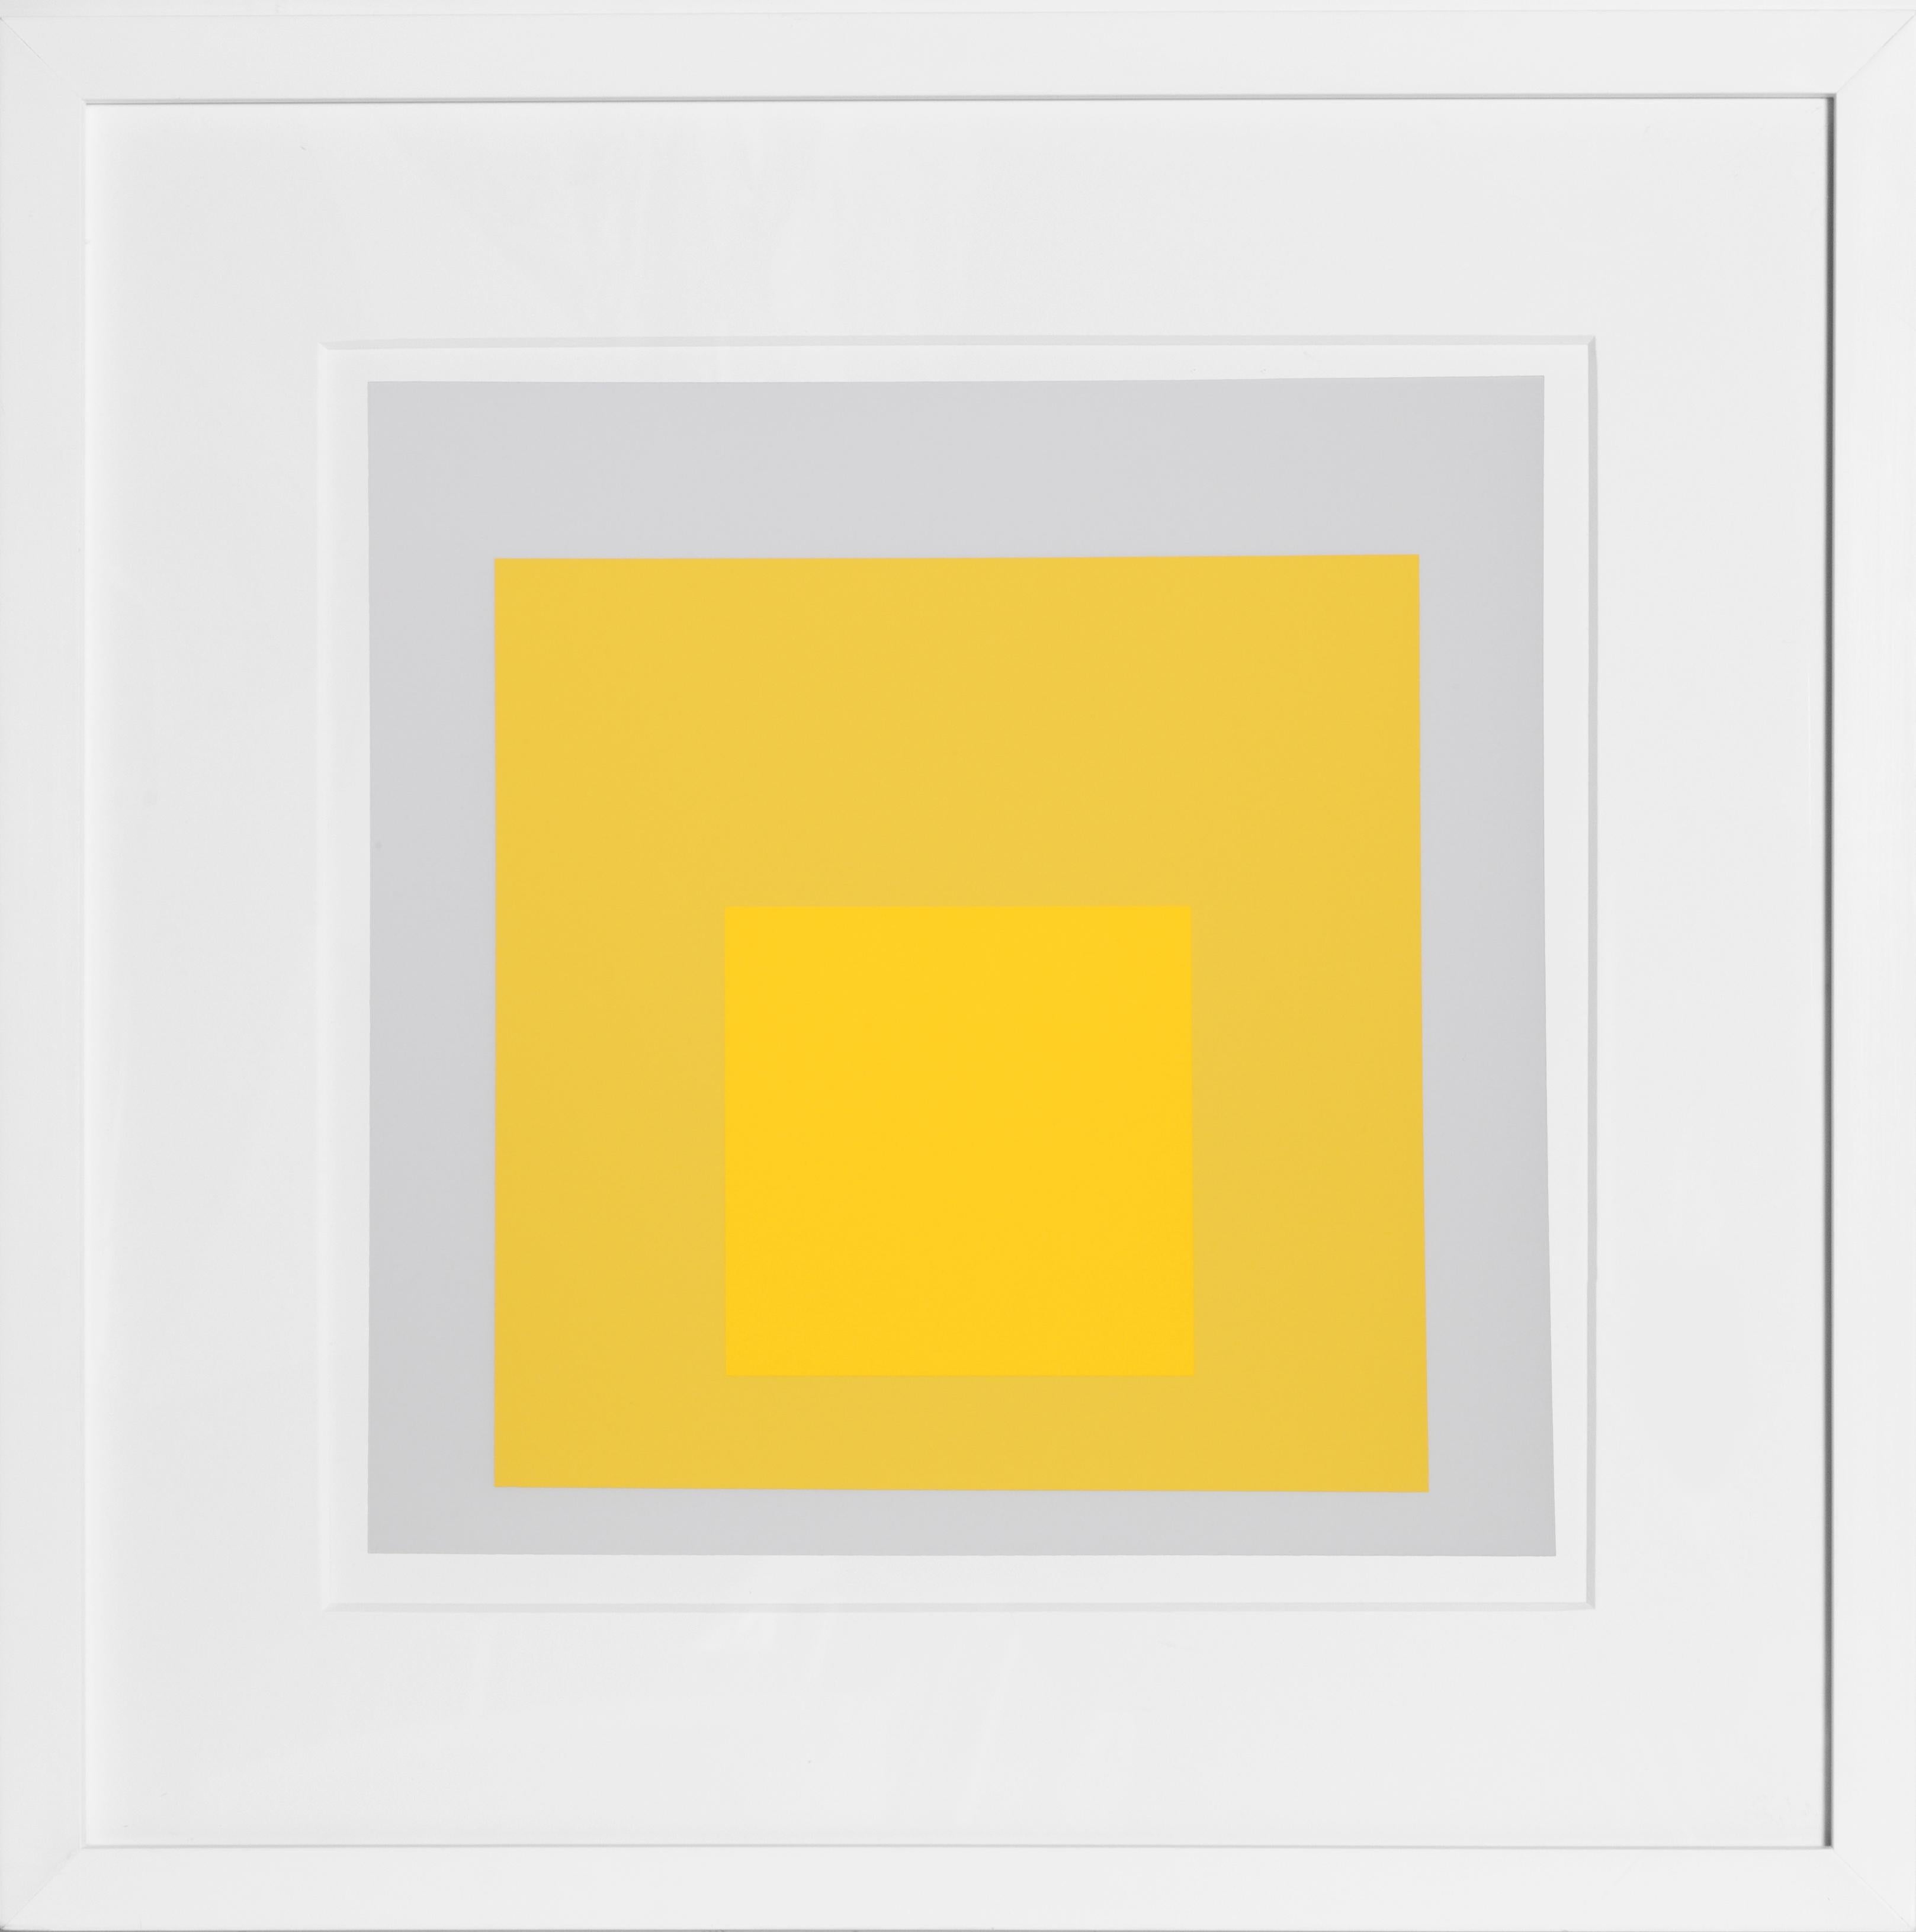 Abstract Print Josef Albers - Hommage au carré - P2, F4, I2